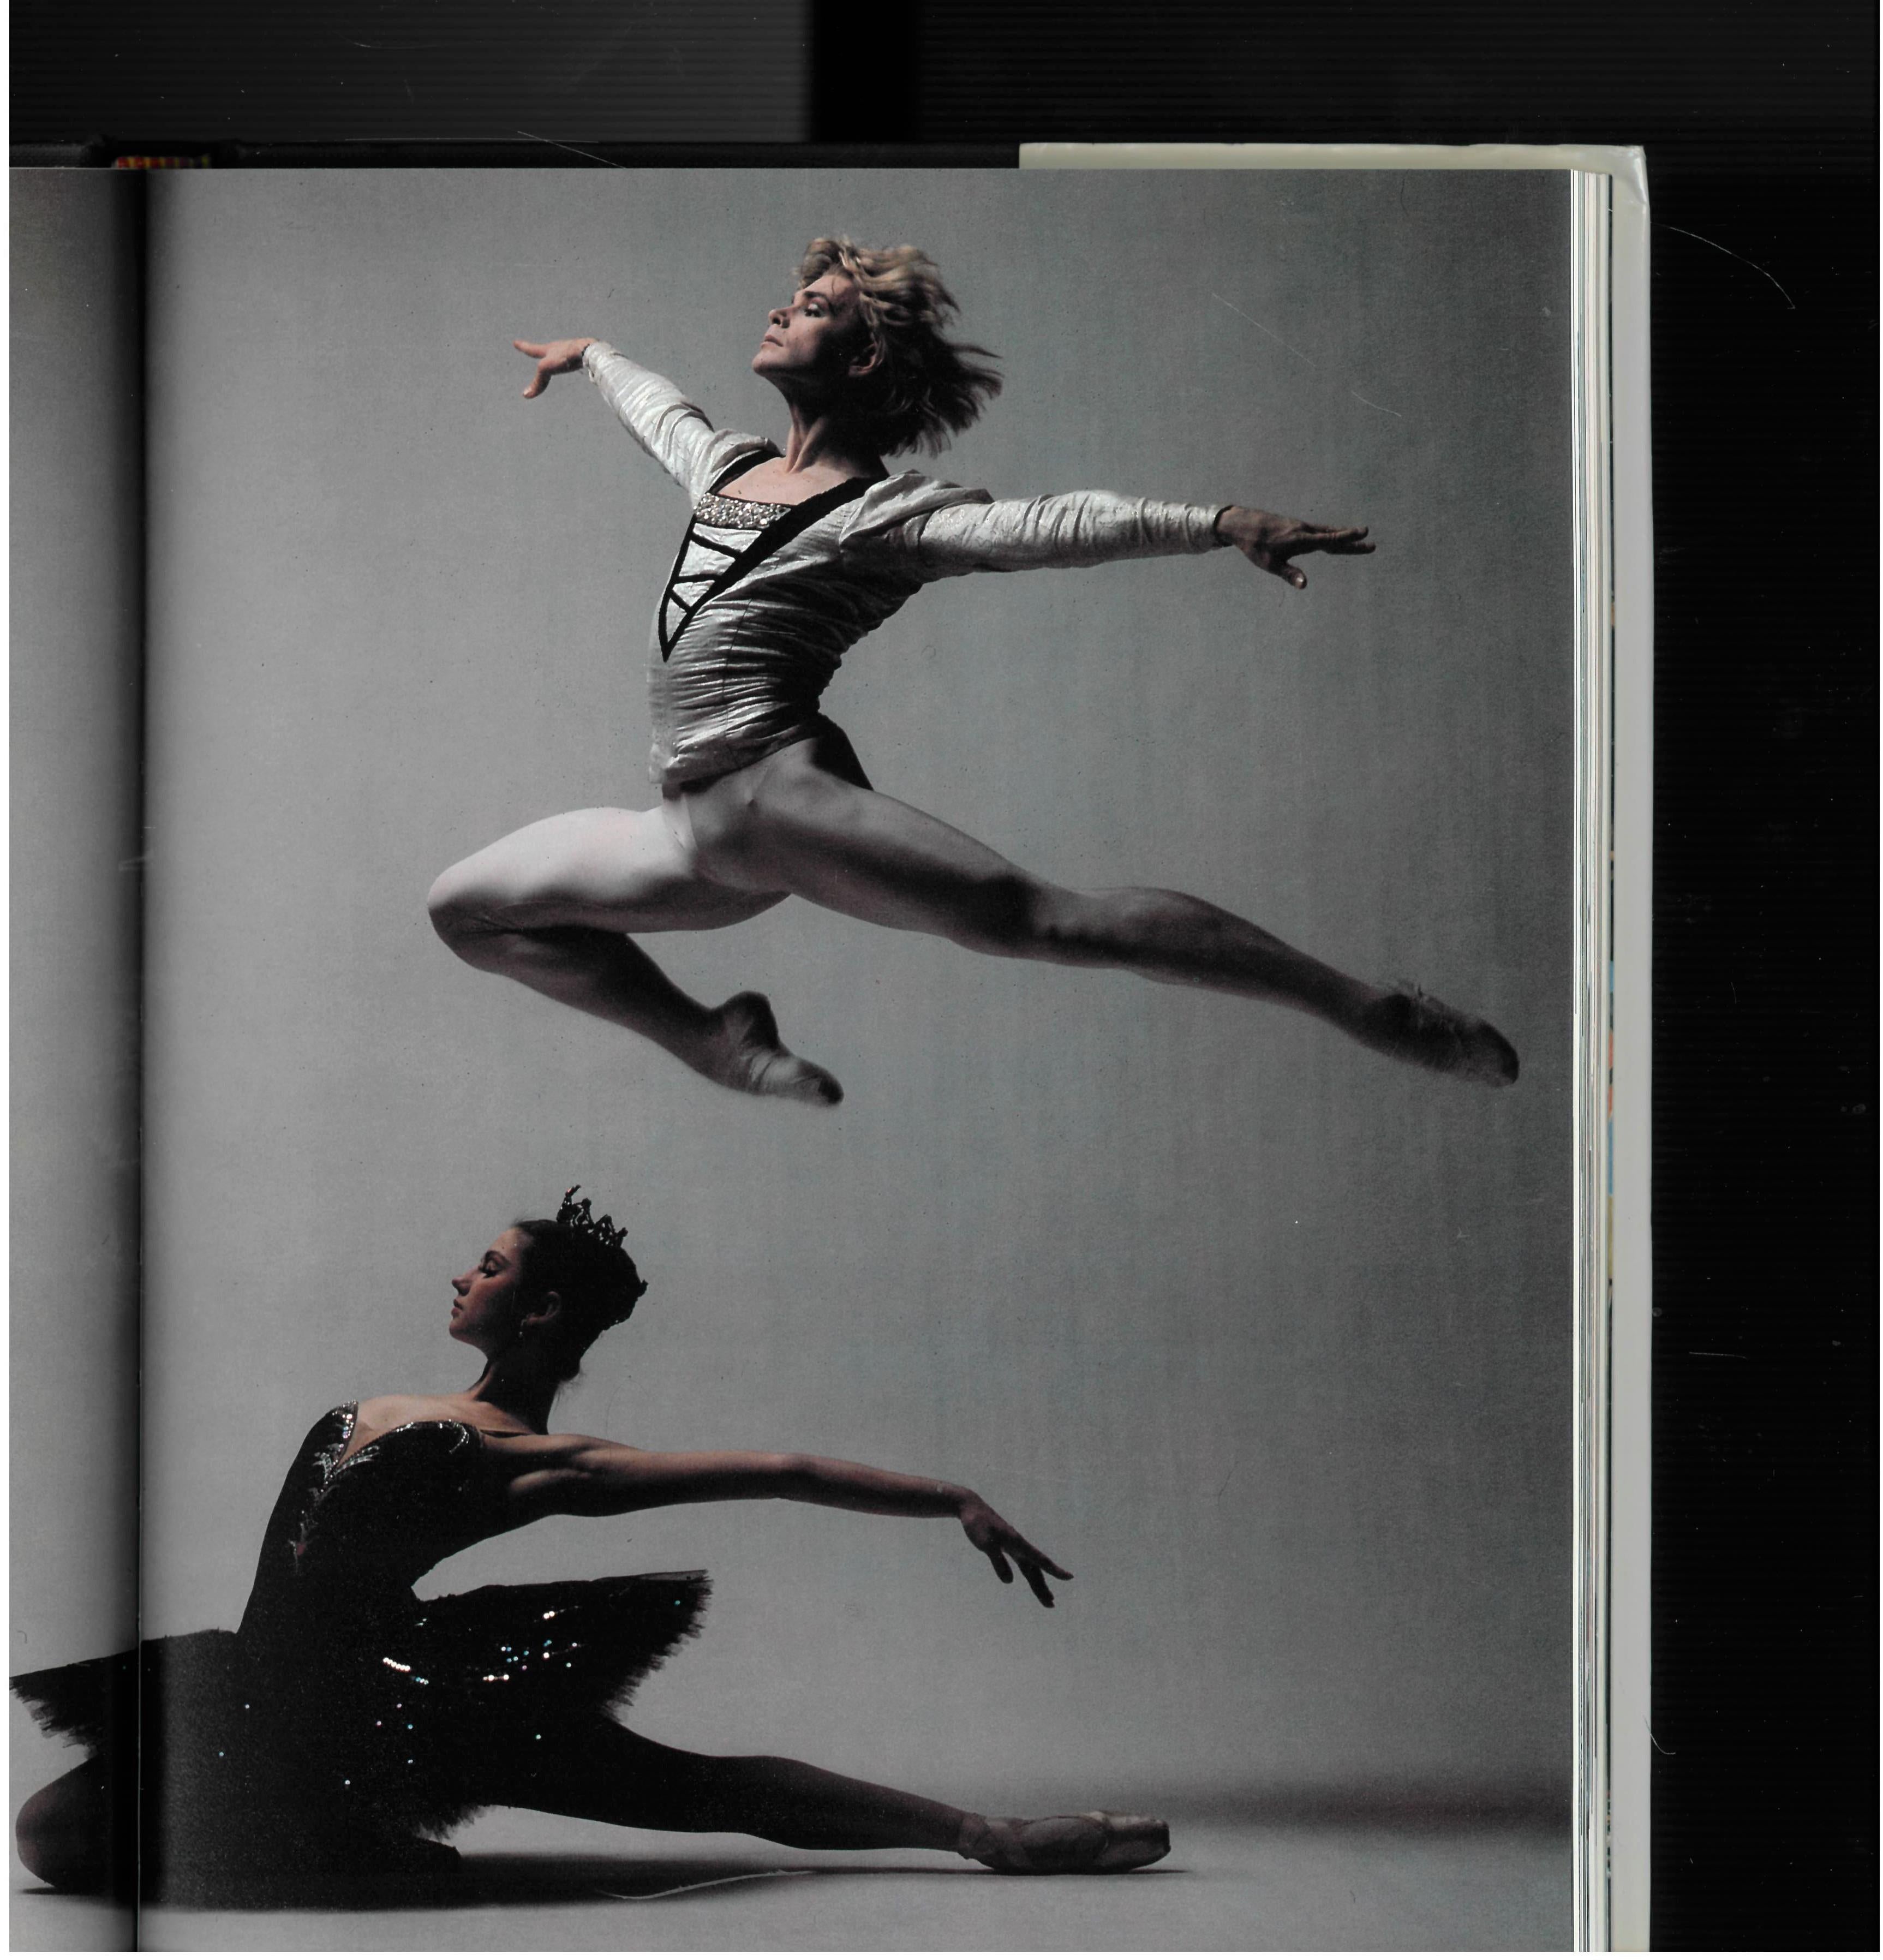 This is a wonderful collection of photographs taken by Lord Snowdon, who was one of the great portrait photographers of the 20th century. International figures from a wide cross-section of public life are captured - Classical Ballet dancers like